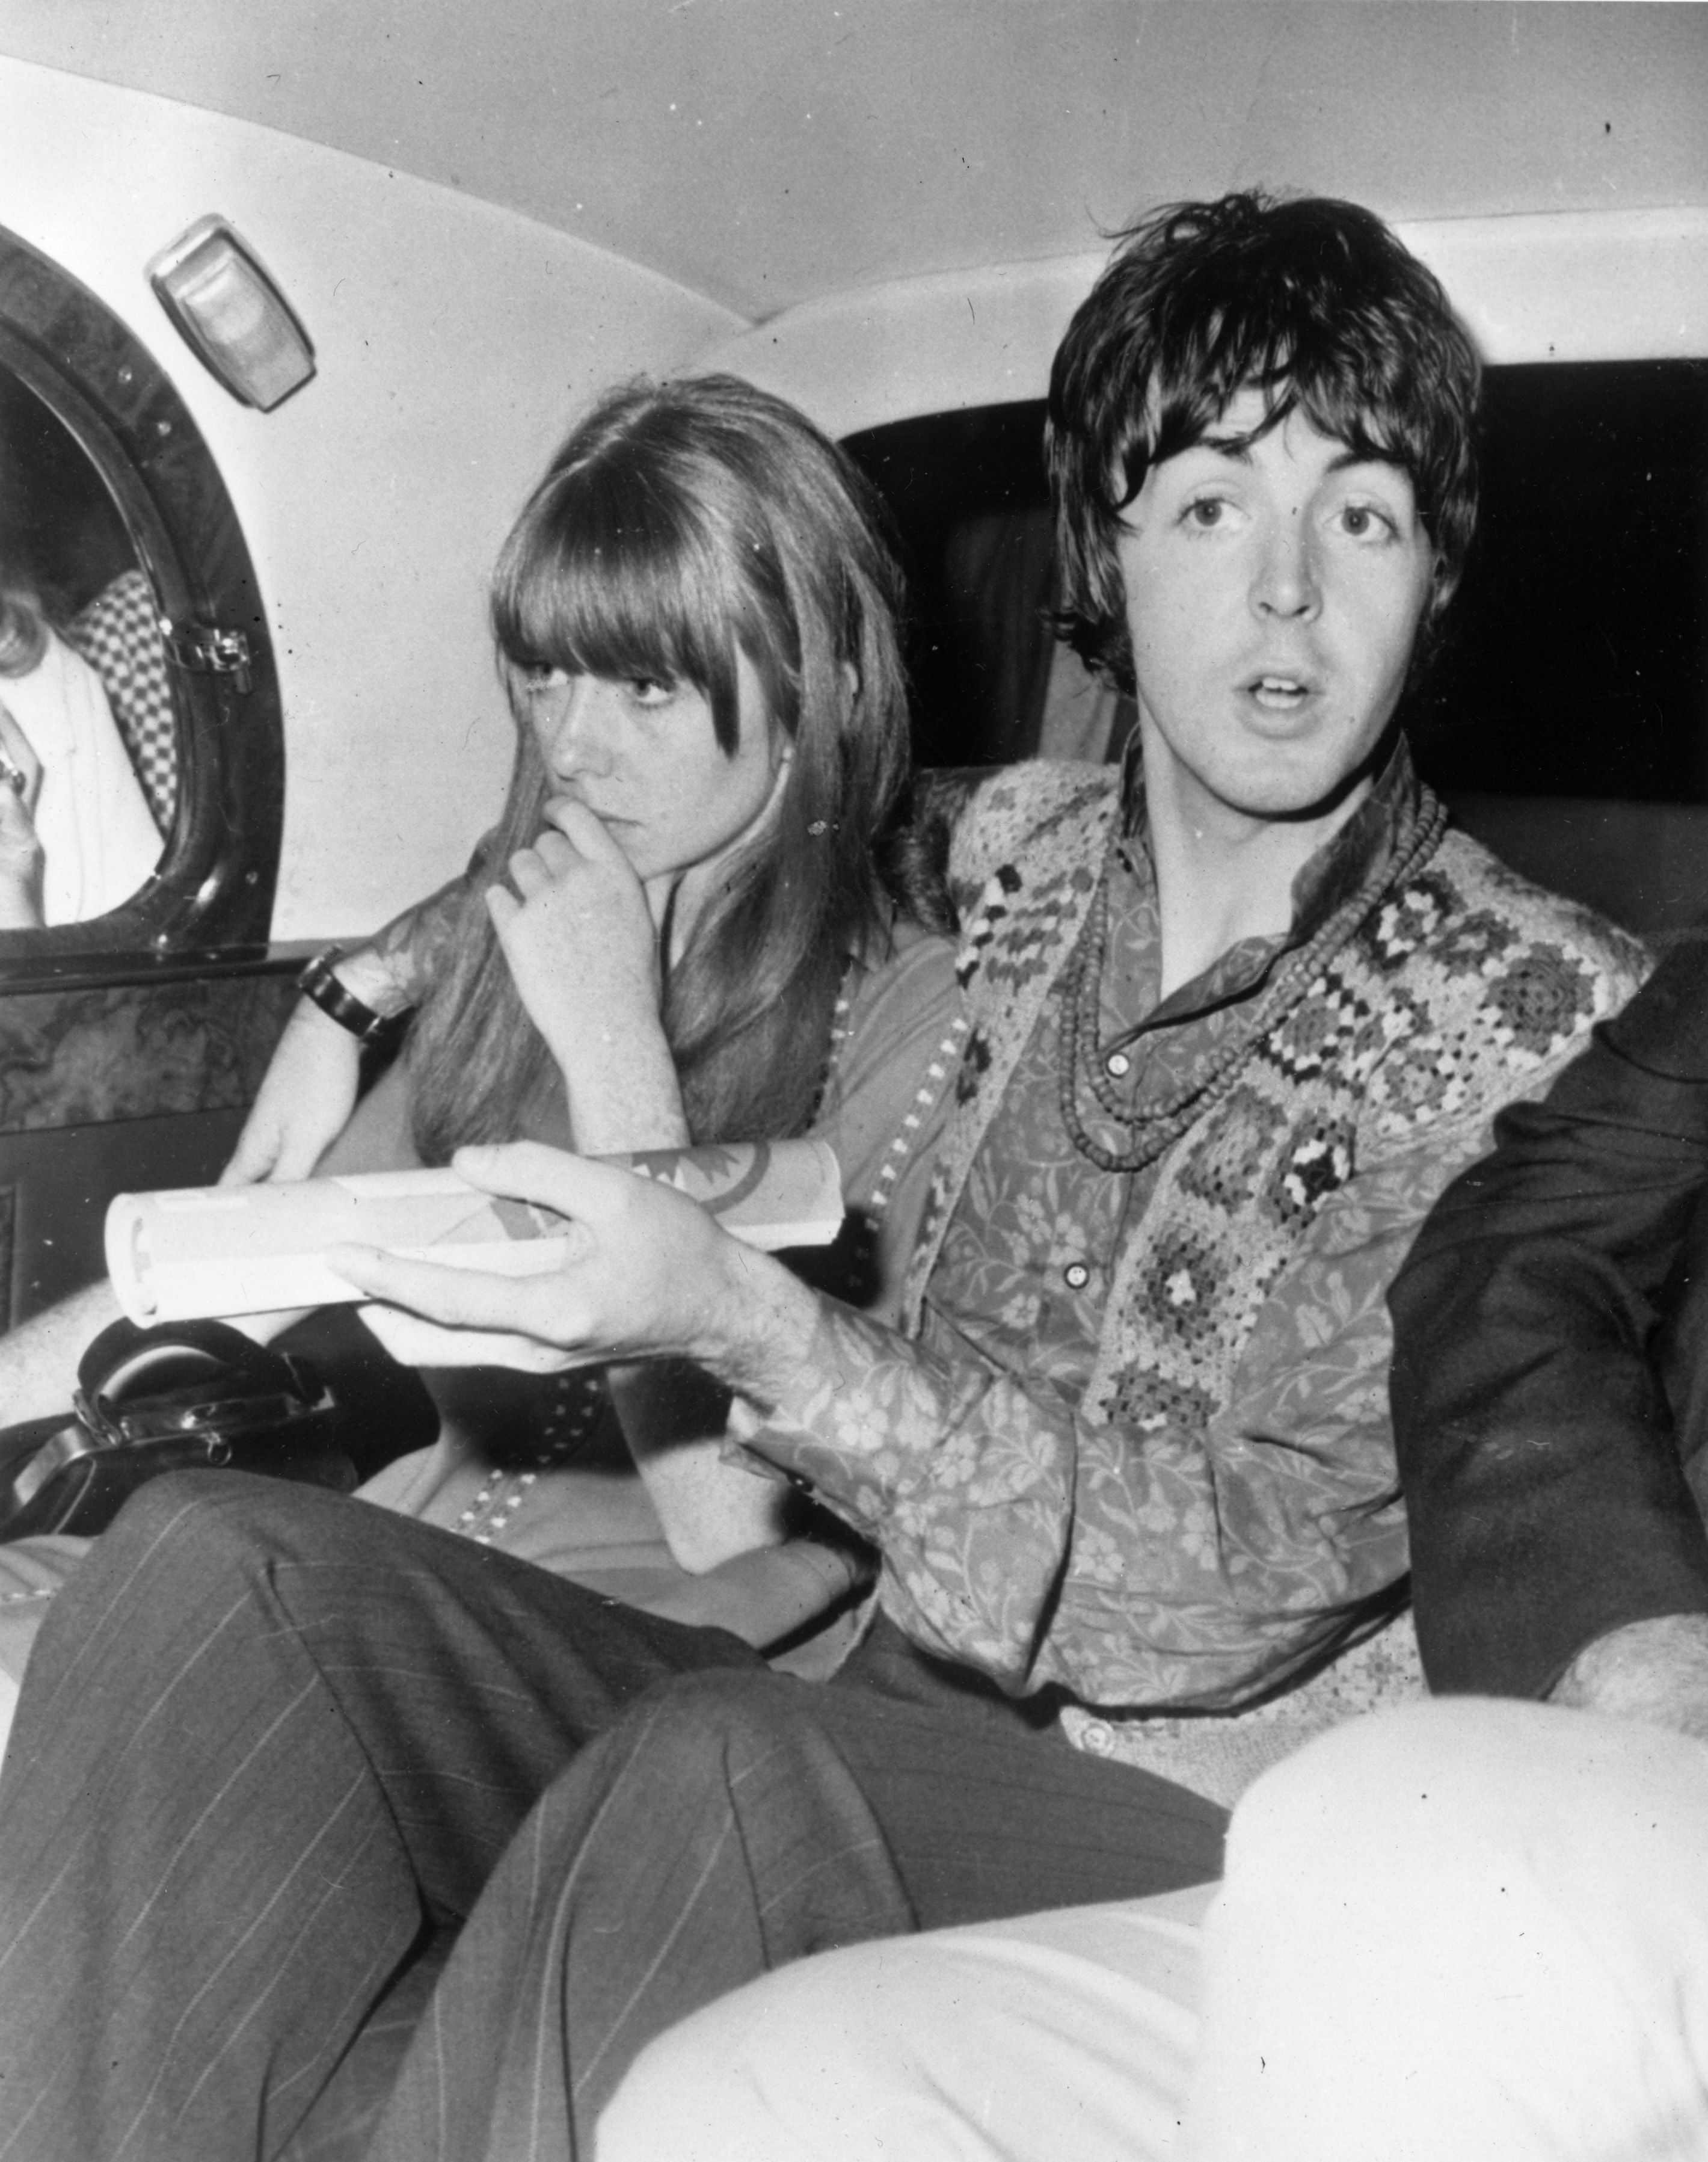 McCartney and Asher in Wales in 1967